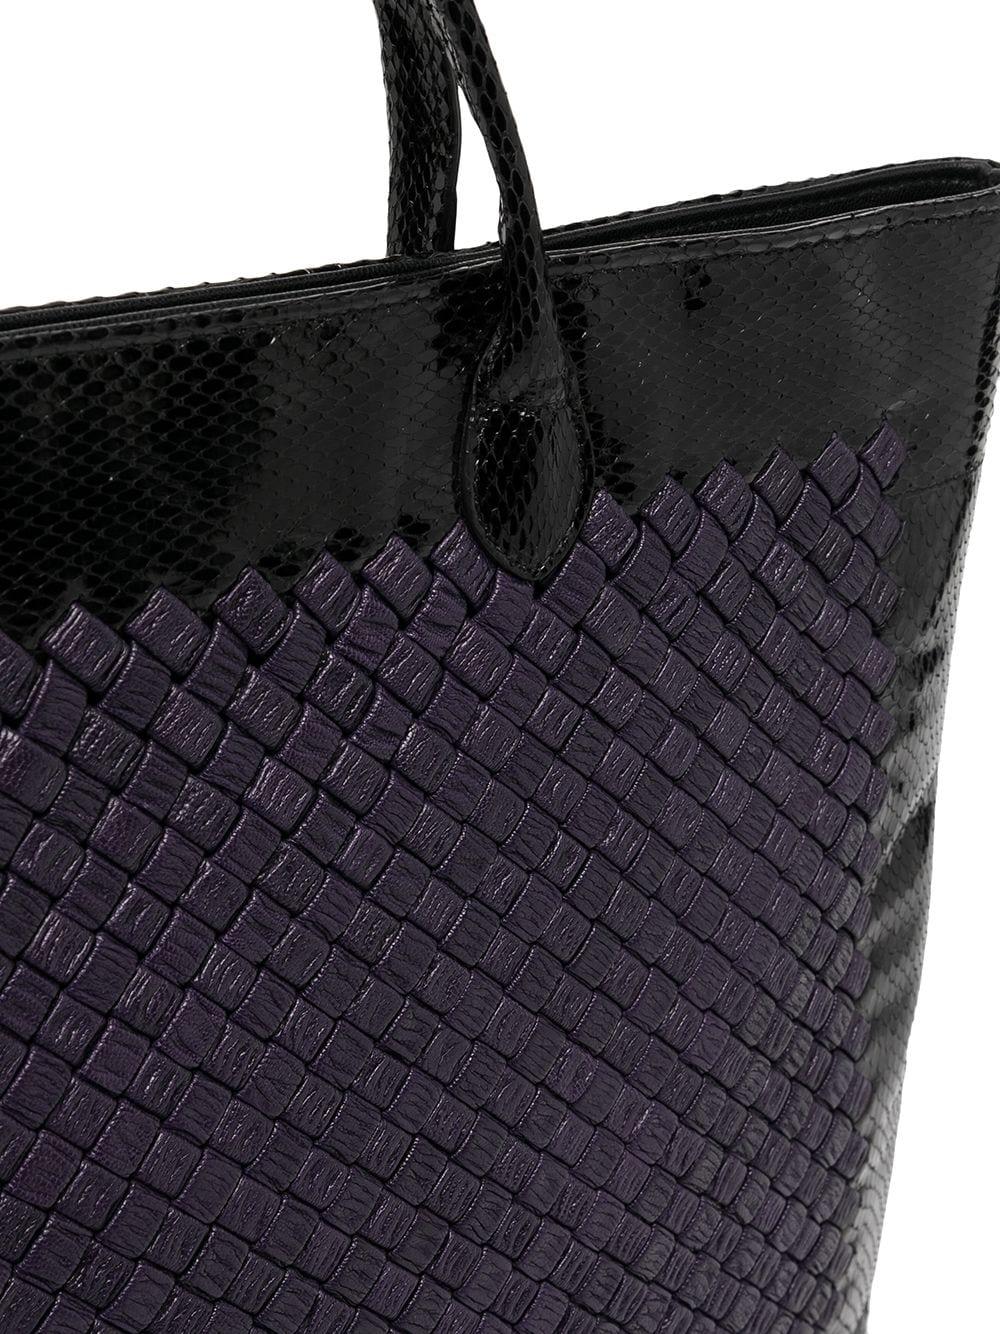 A rare and limited-edition piece from Bottega Veneta, this stunning pre-owned bag displays their quality craftsmanship and has been crafted from a rich purple and black leather the iconic intrecciato weave, which is a signature design of the brand.